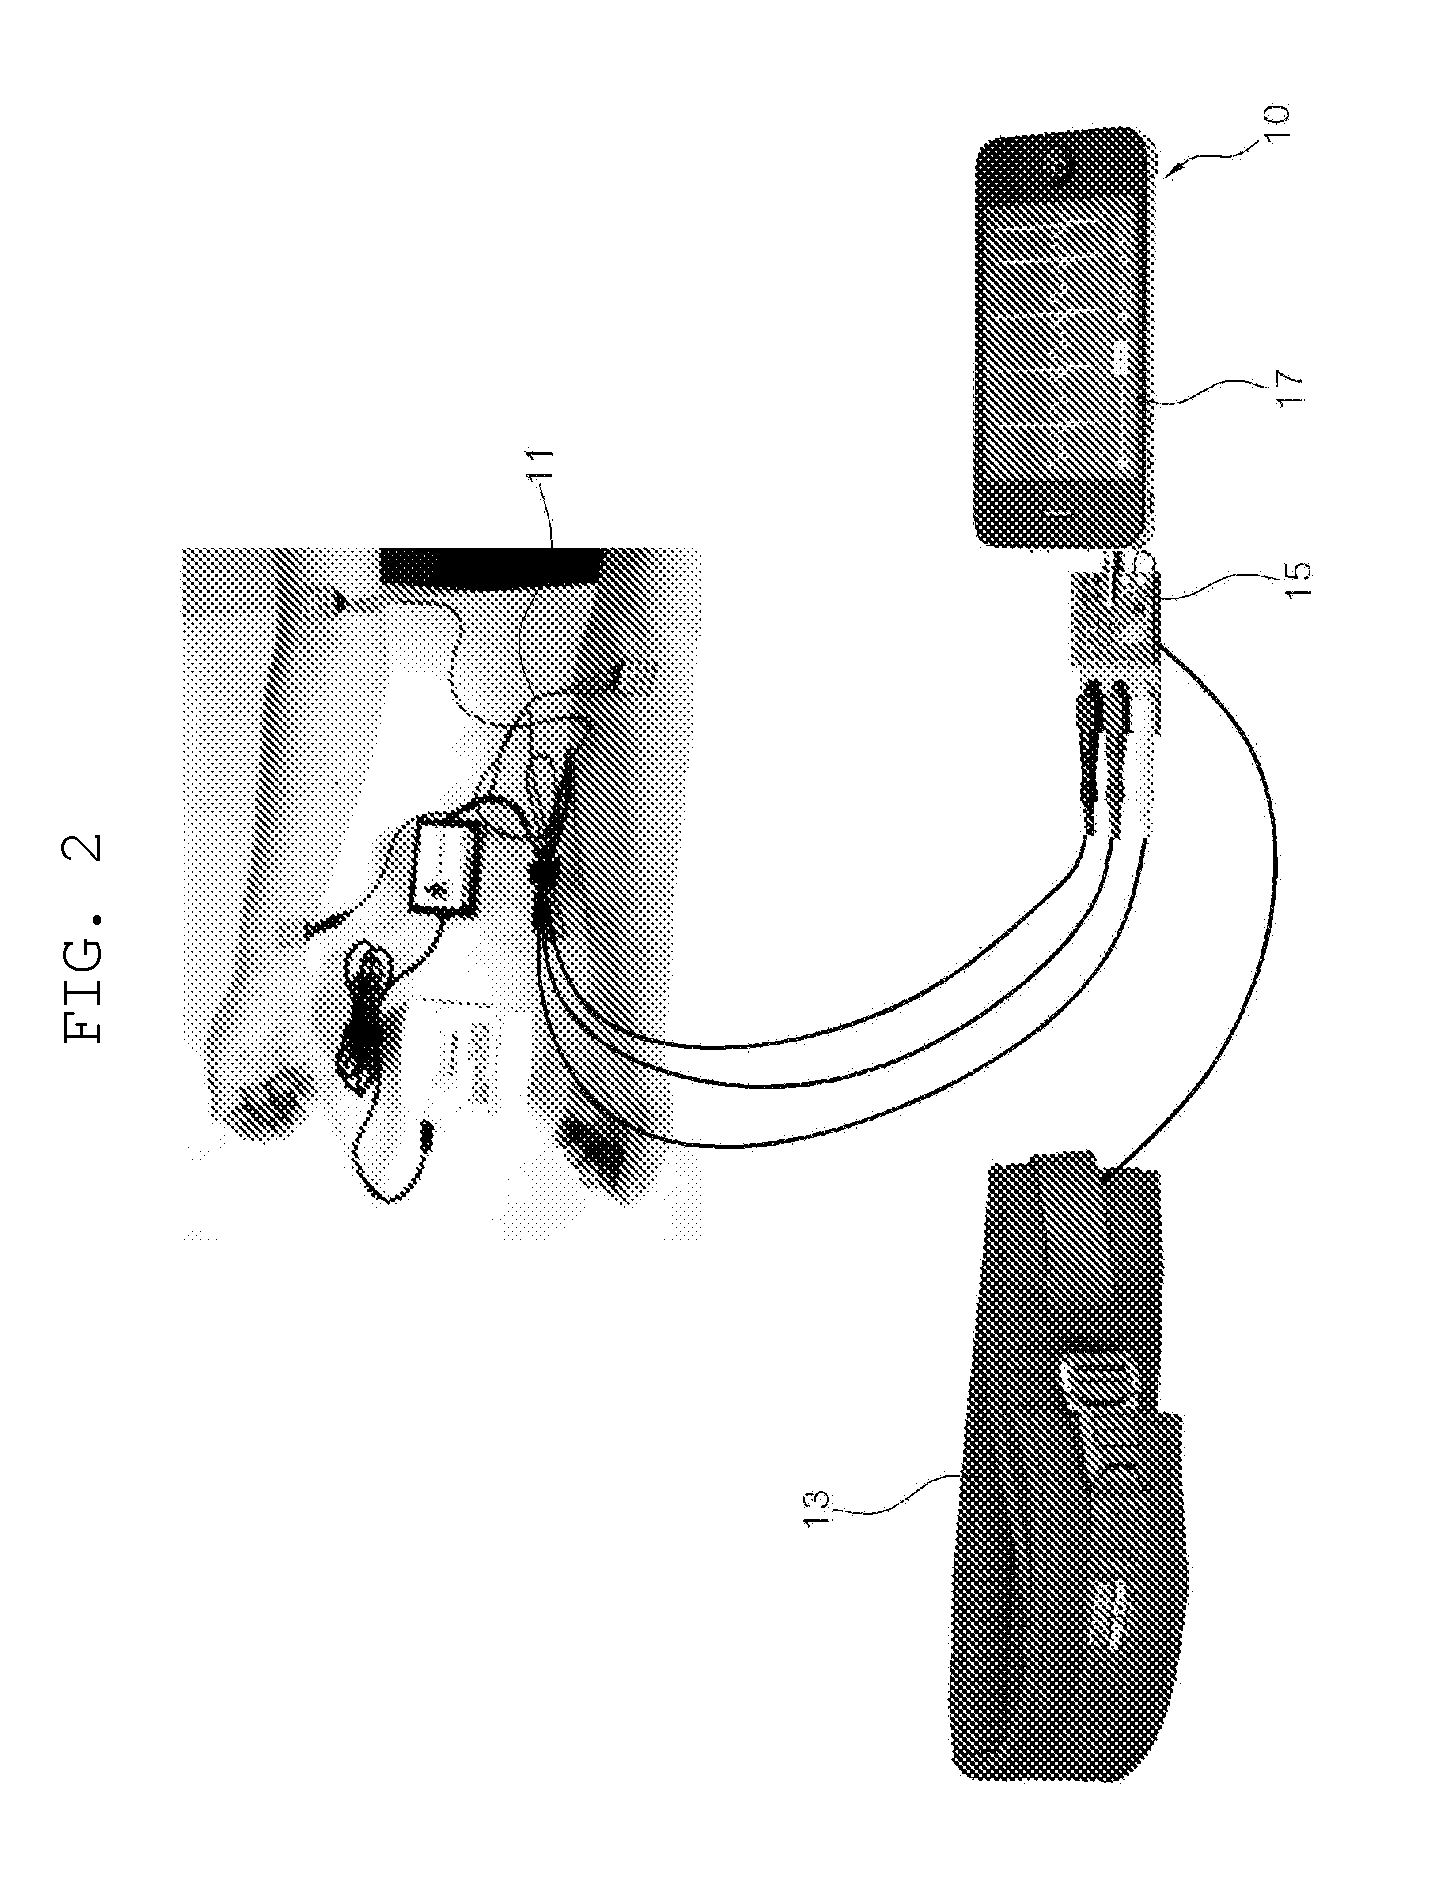 System and method for assessing treatment effects on obstructive sleep apnea